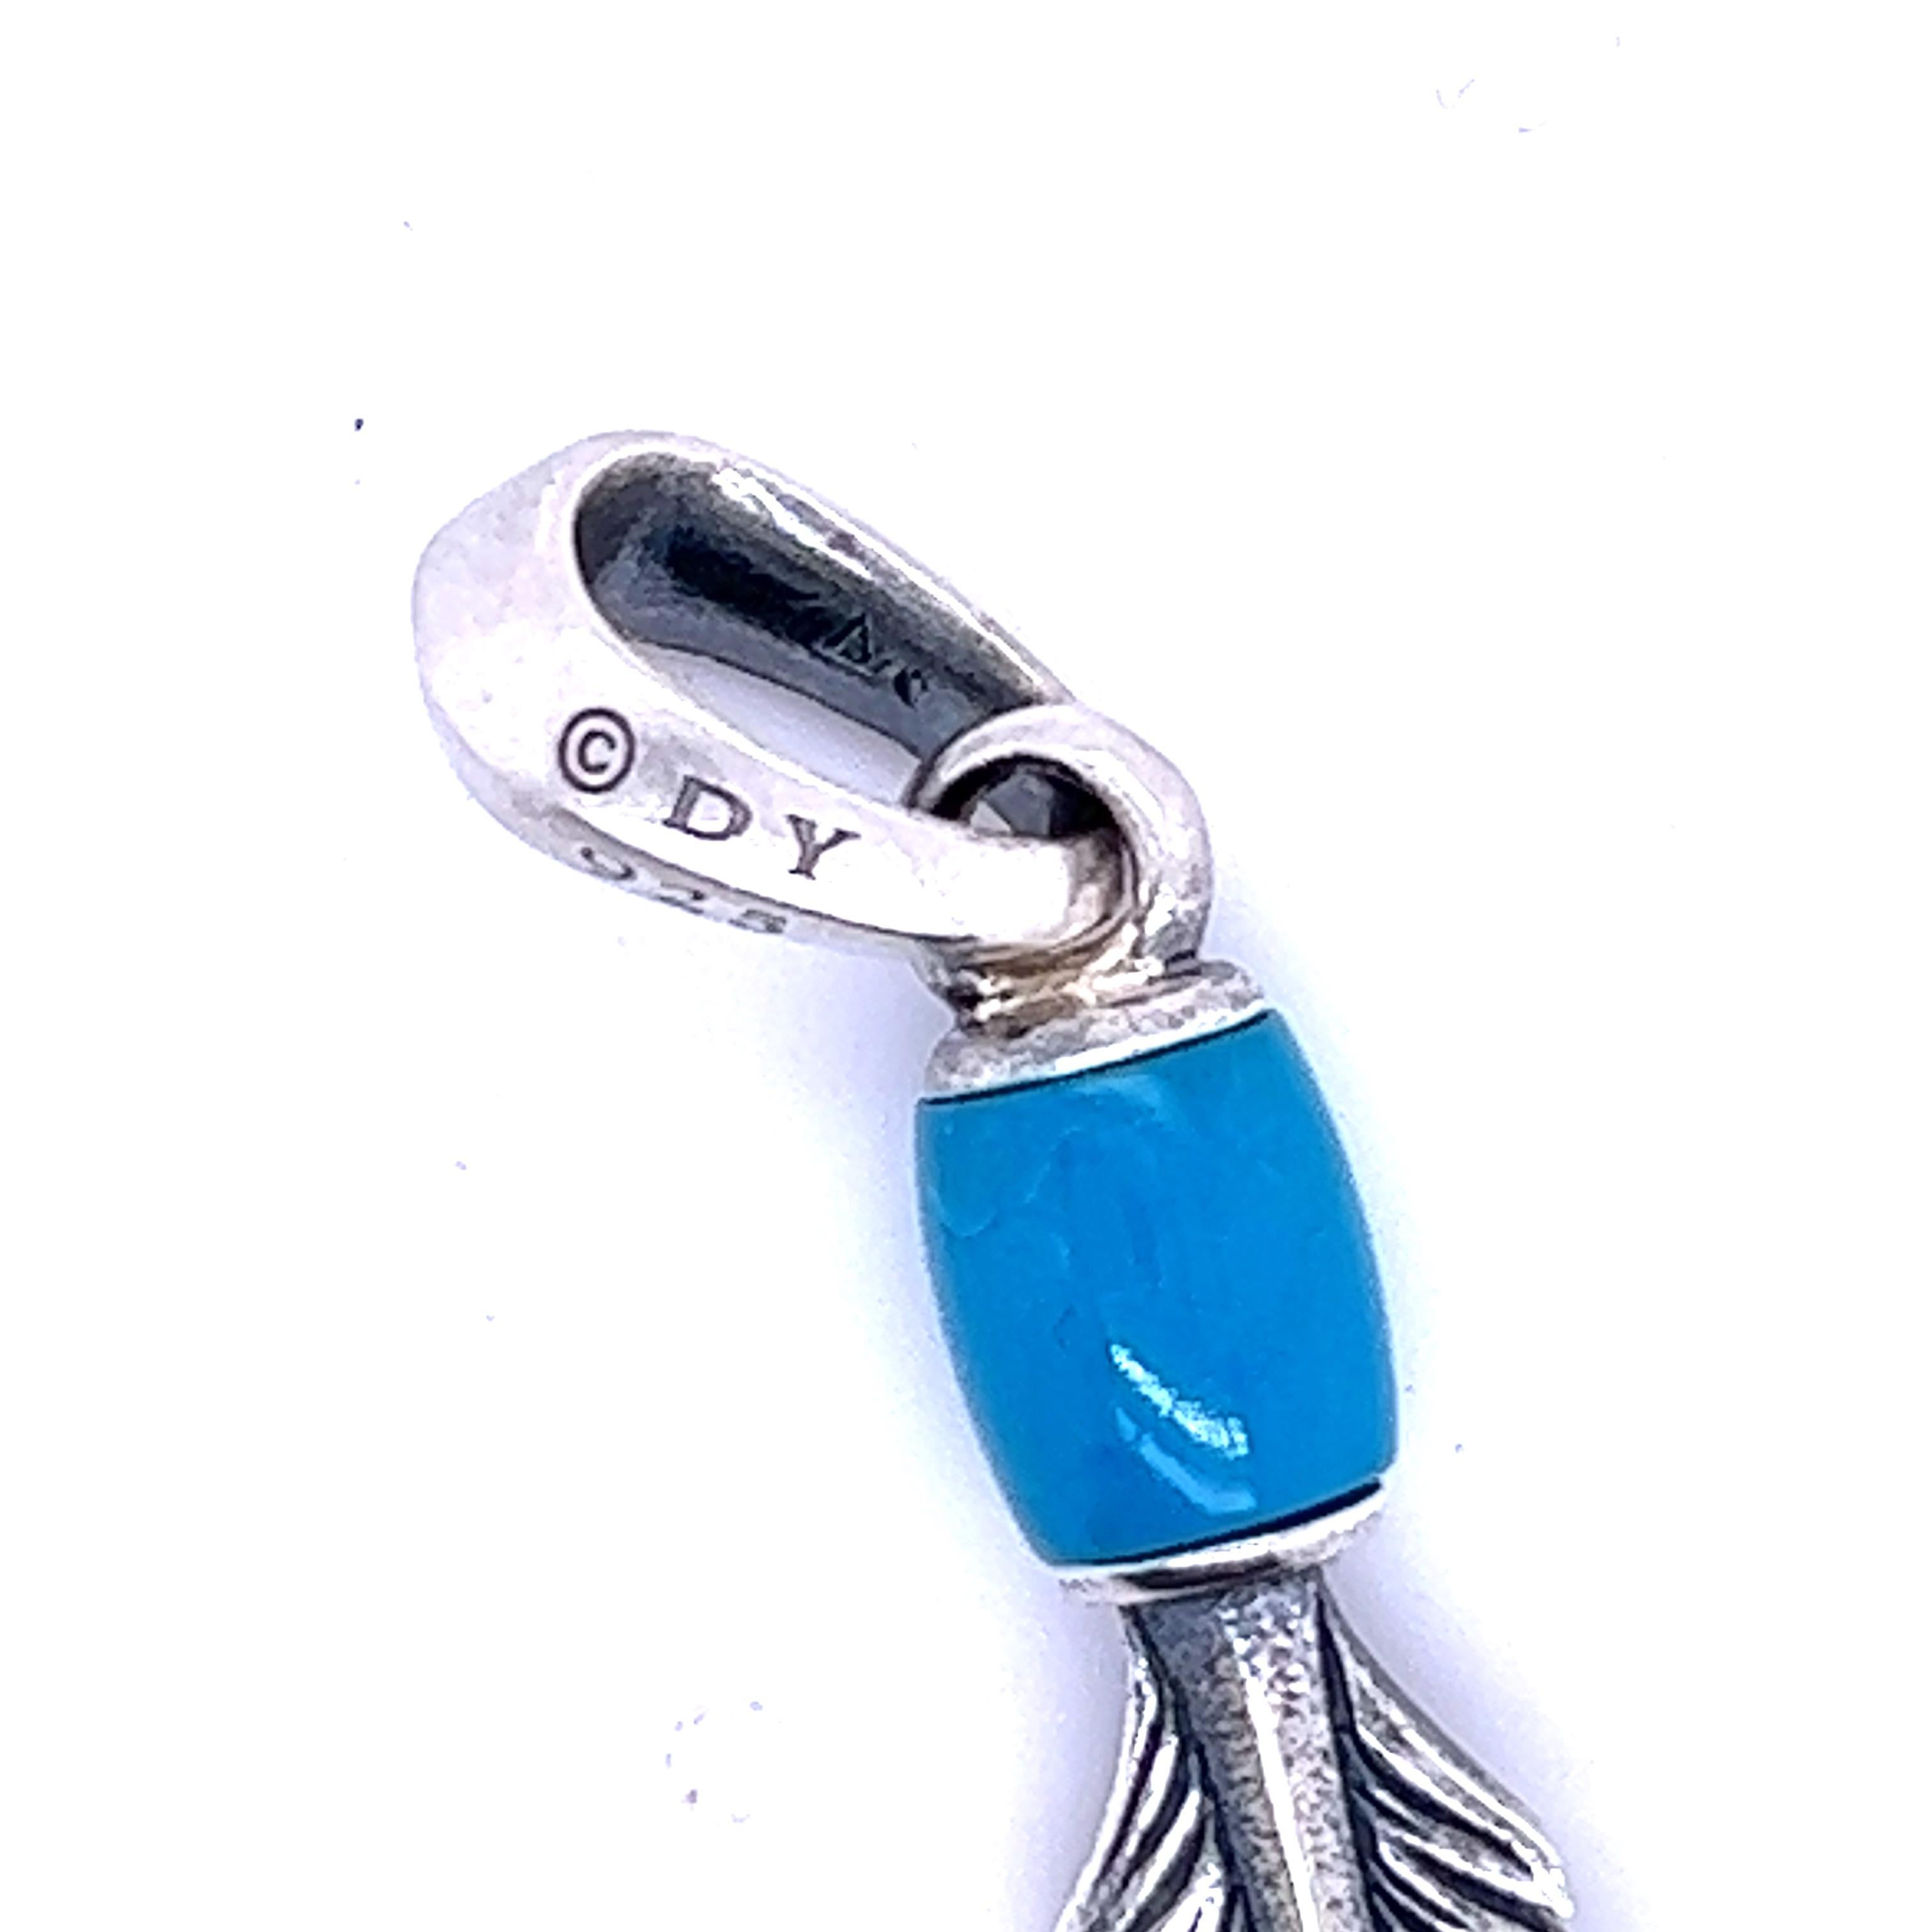 David Yurman Authentic Estate Blue Turquoise Southwest Feather Amulet Silver 8.7 mm DY180

TRUSTED SELLER SINCE 2002

PLEASE SEE OUR HUNDREDS OF POSITIVE FEEDBACKS FROM OUR CLIENTS!!

FREE SHIPPING

This elegant Authentic David Yurman Men's sterling